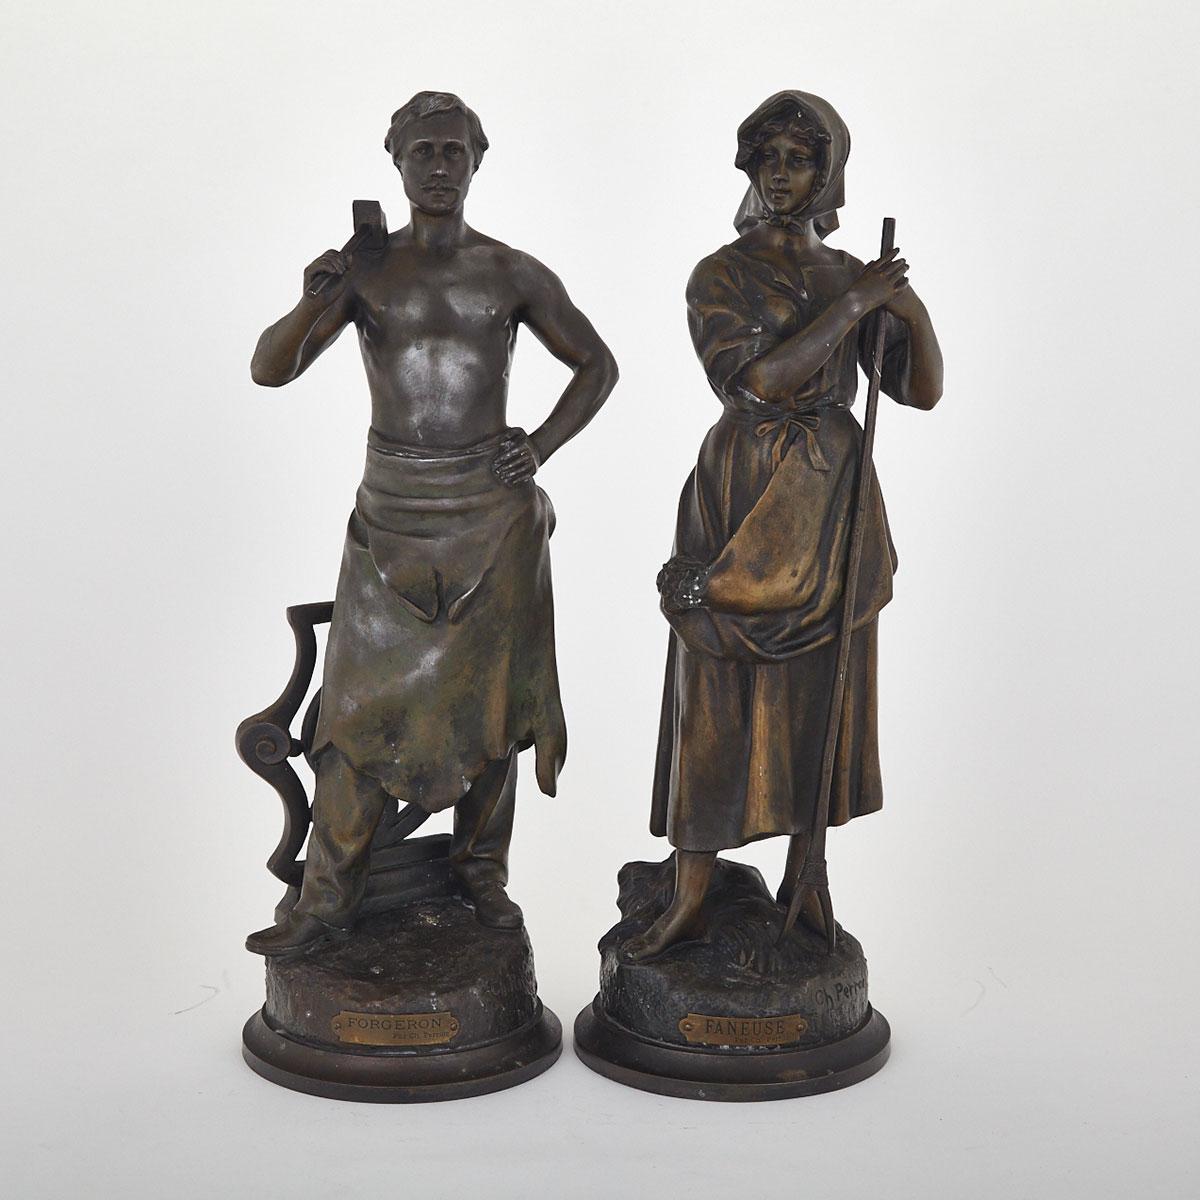 Charles Théodore Perron (1862 - 1934), Pair of Patinated Metal Figures of ‘Faneuse’ and ‘Forgeron’, 19th century